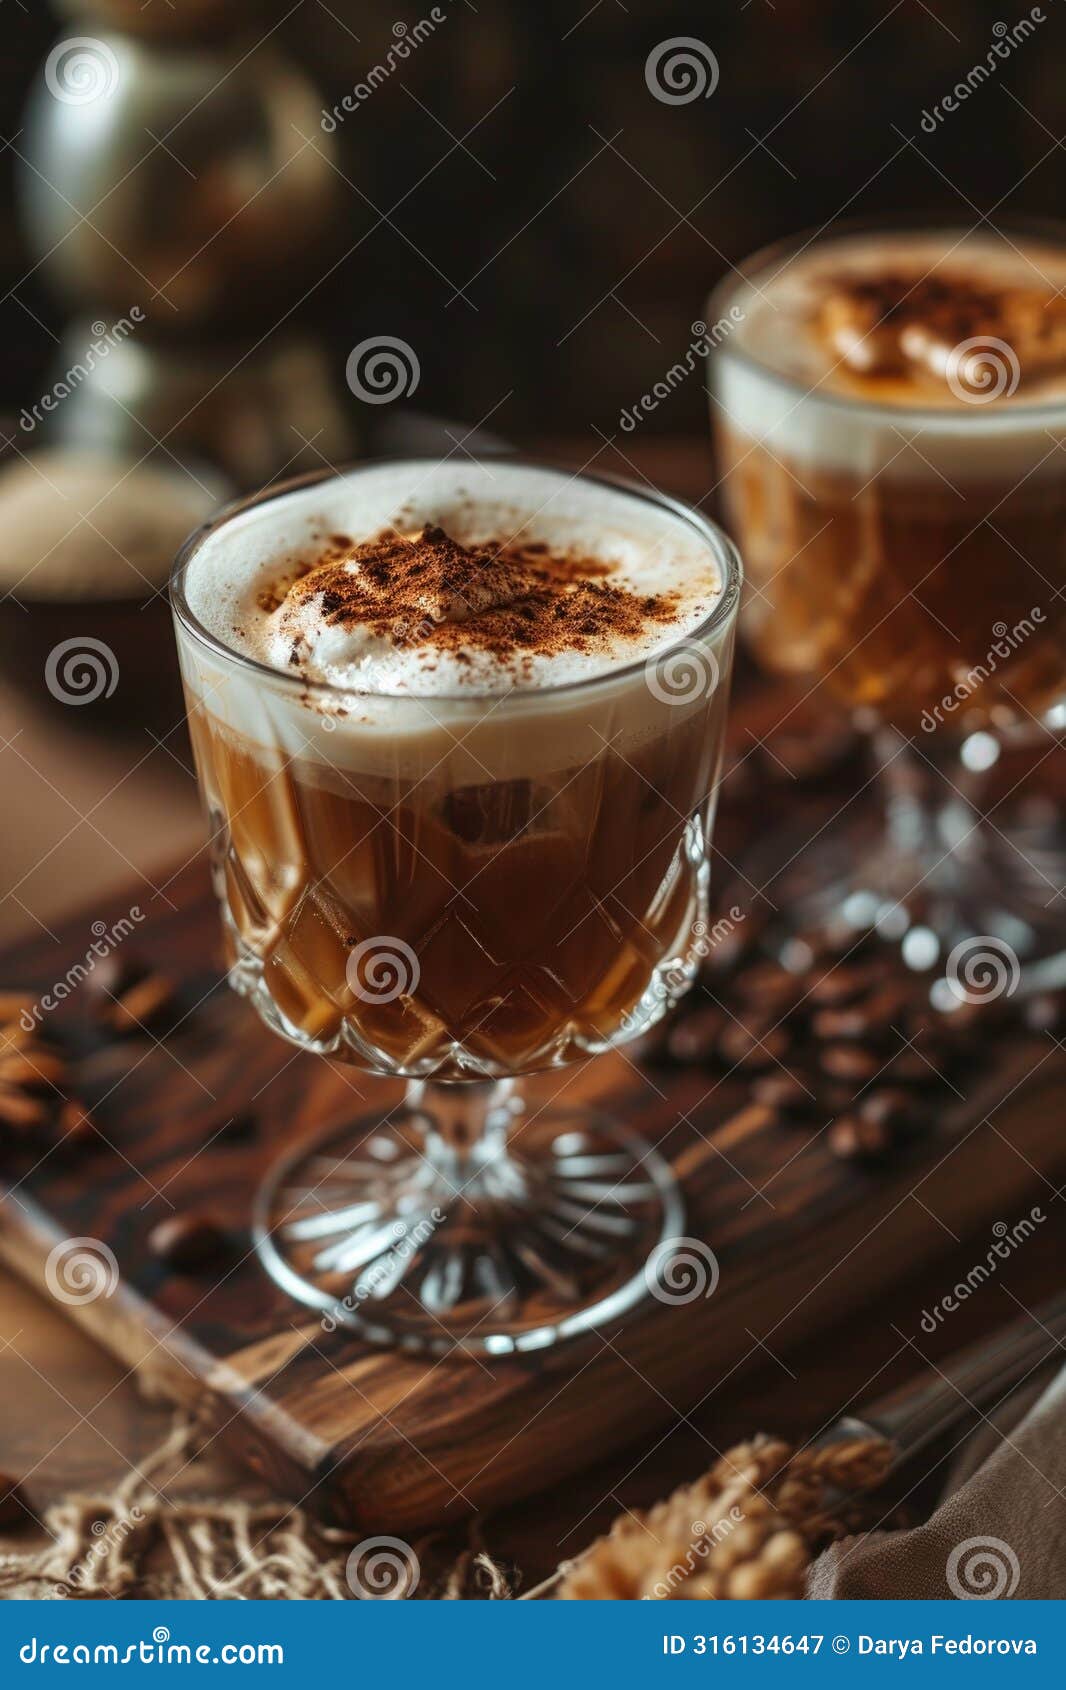 decadent coffee cocktail with cream and beans